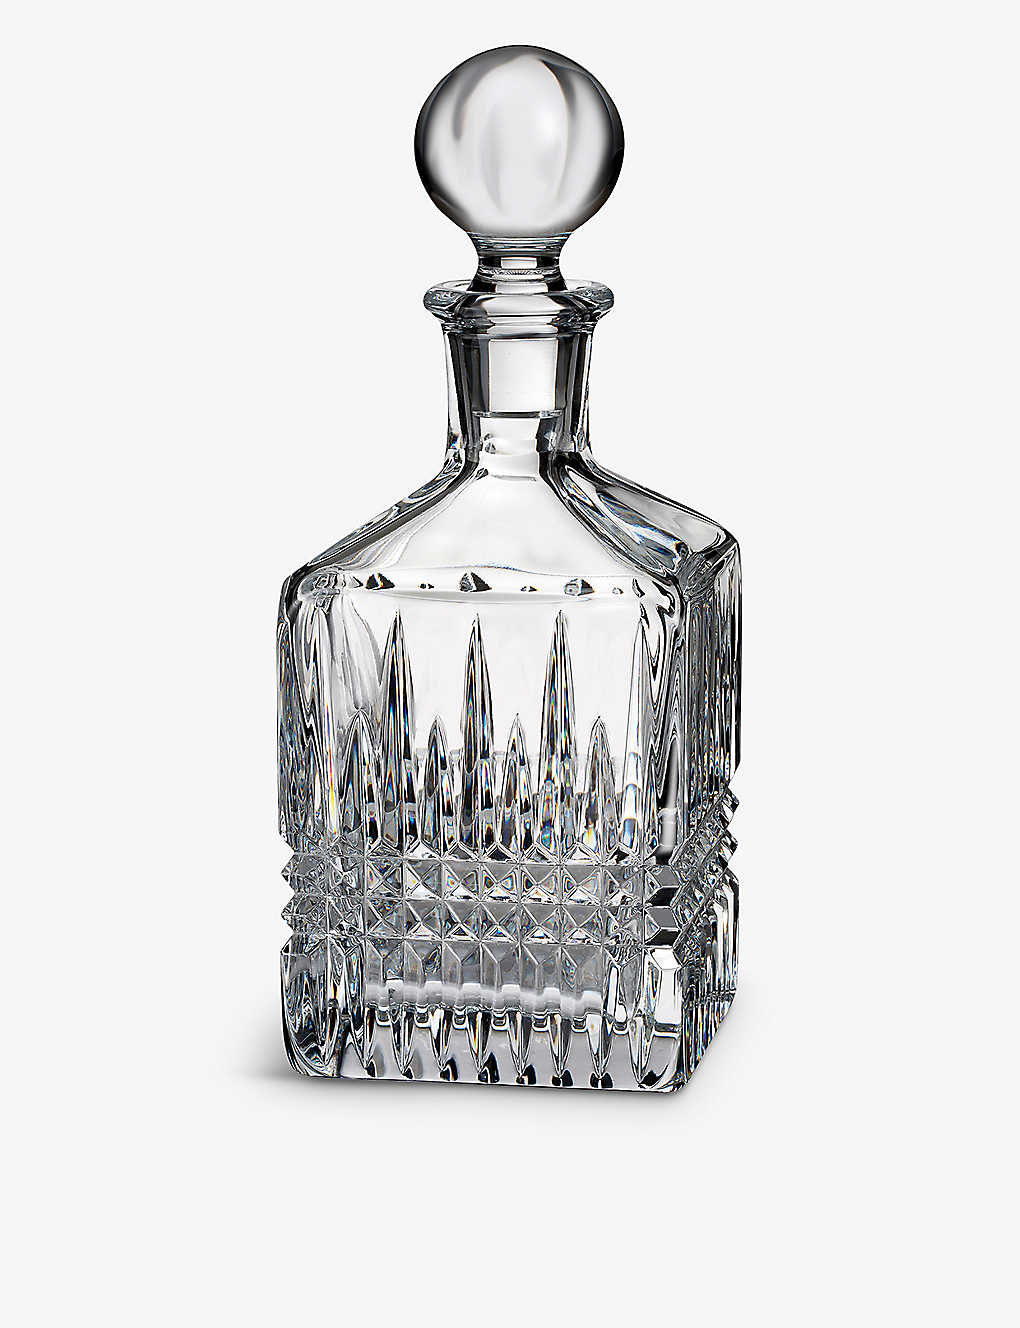 Waterford Lismore Diamond-pattern Square Crystal Decanter 23.4cm